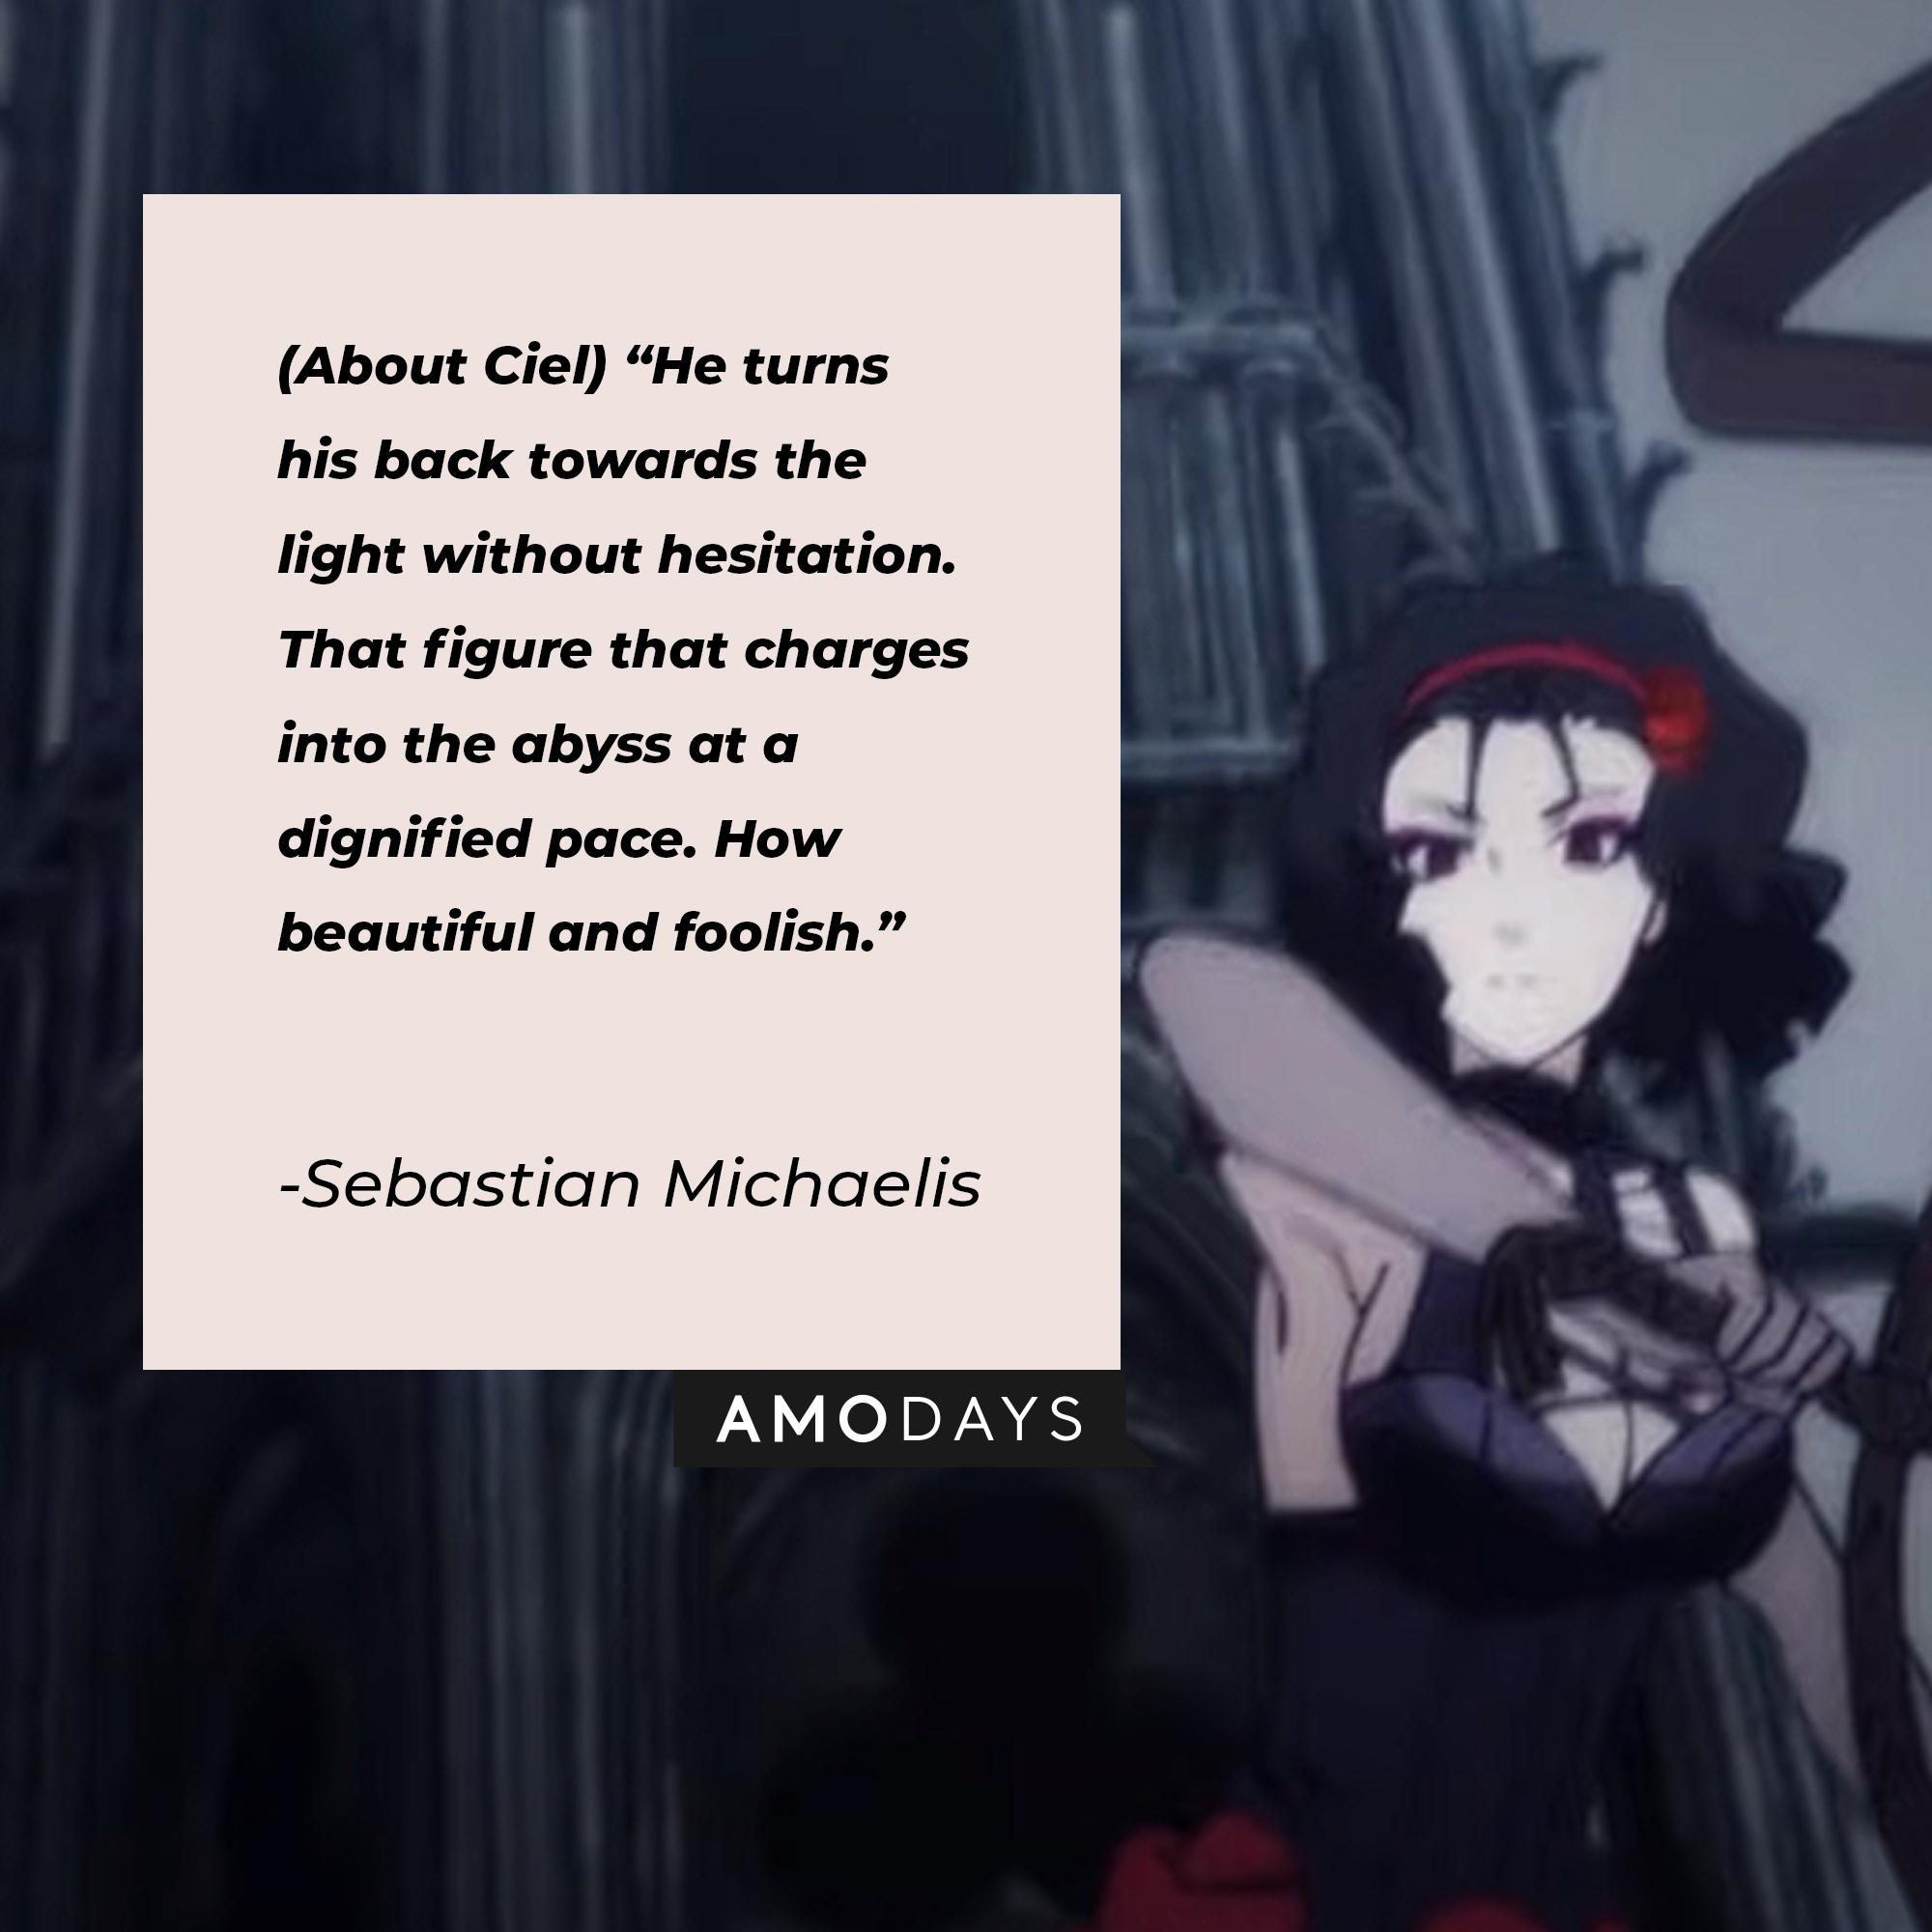 An image from "Black Butler" with Sebastian Michaelis' quote: (About Ciel) "He turns his back towards the light without hesitation. That figure that charges into the abyss at a dignified pace. How beautiful and foolish." | Source: youtube.com/Crunchyroll Dubs